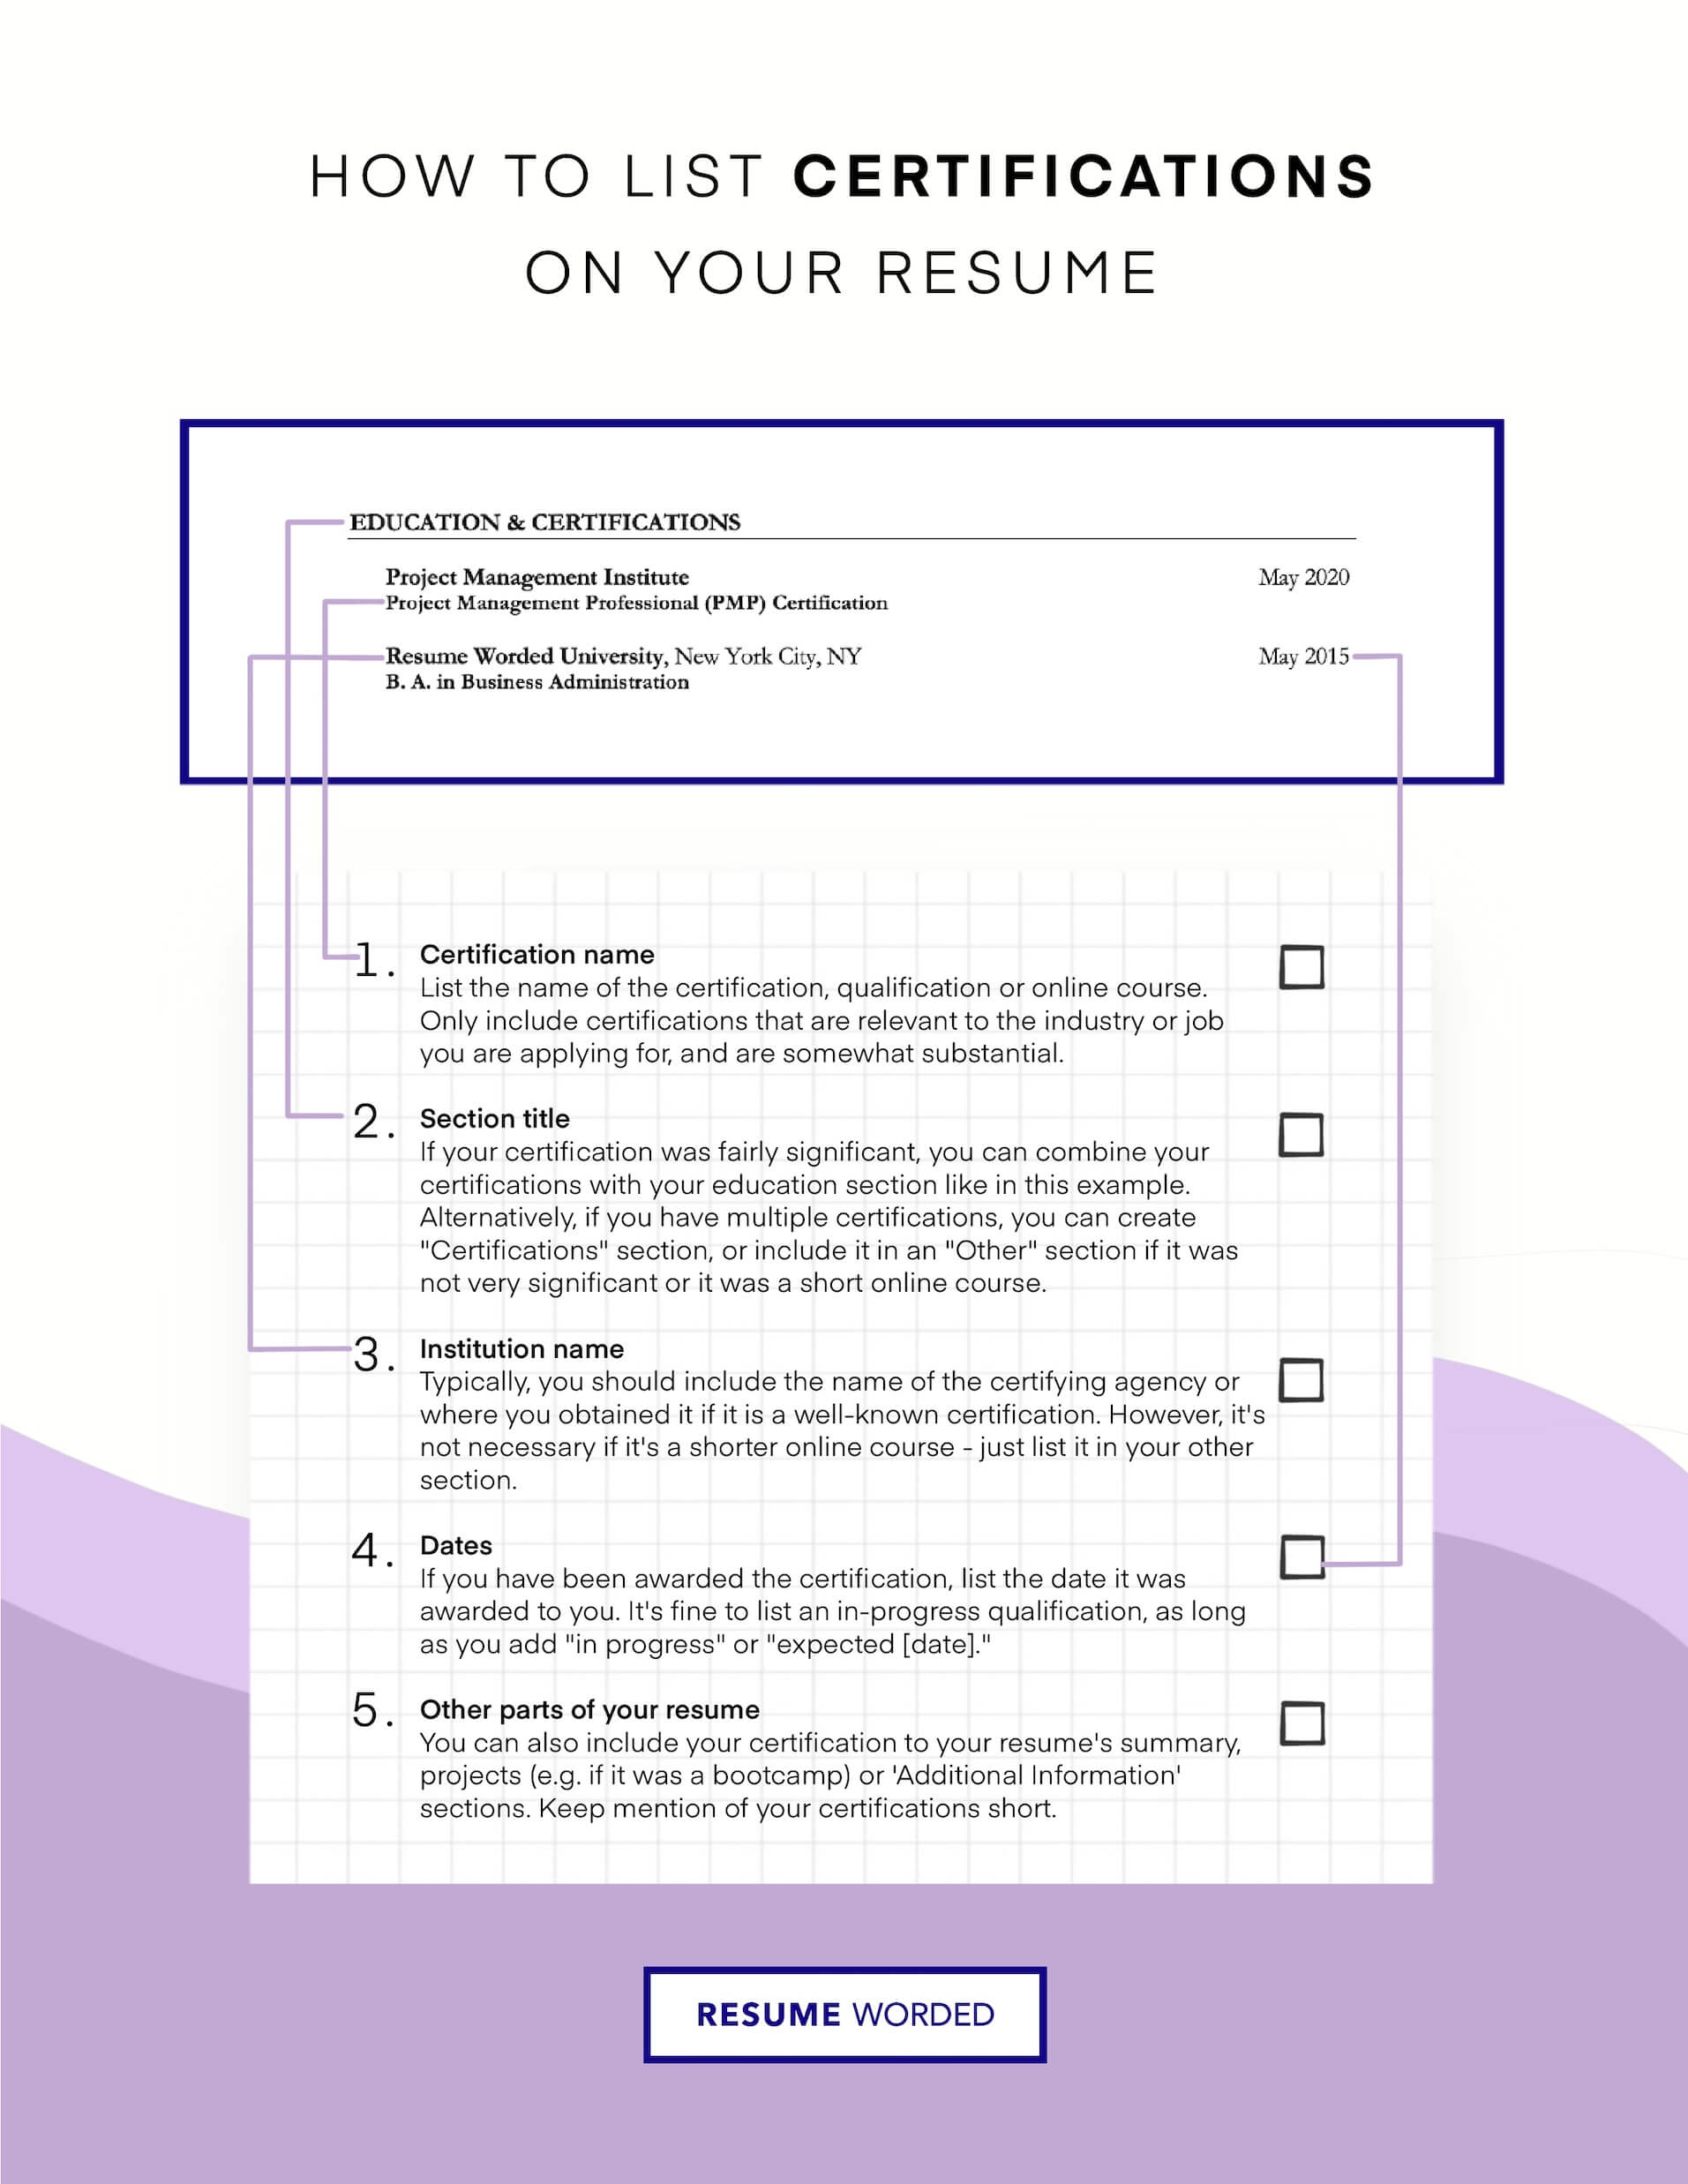 Obtain certifications to stand out - Research Assistant Resume